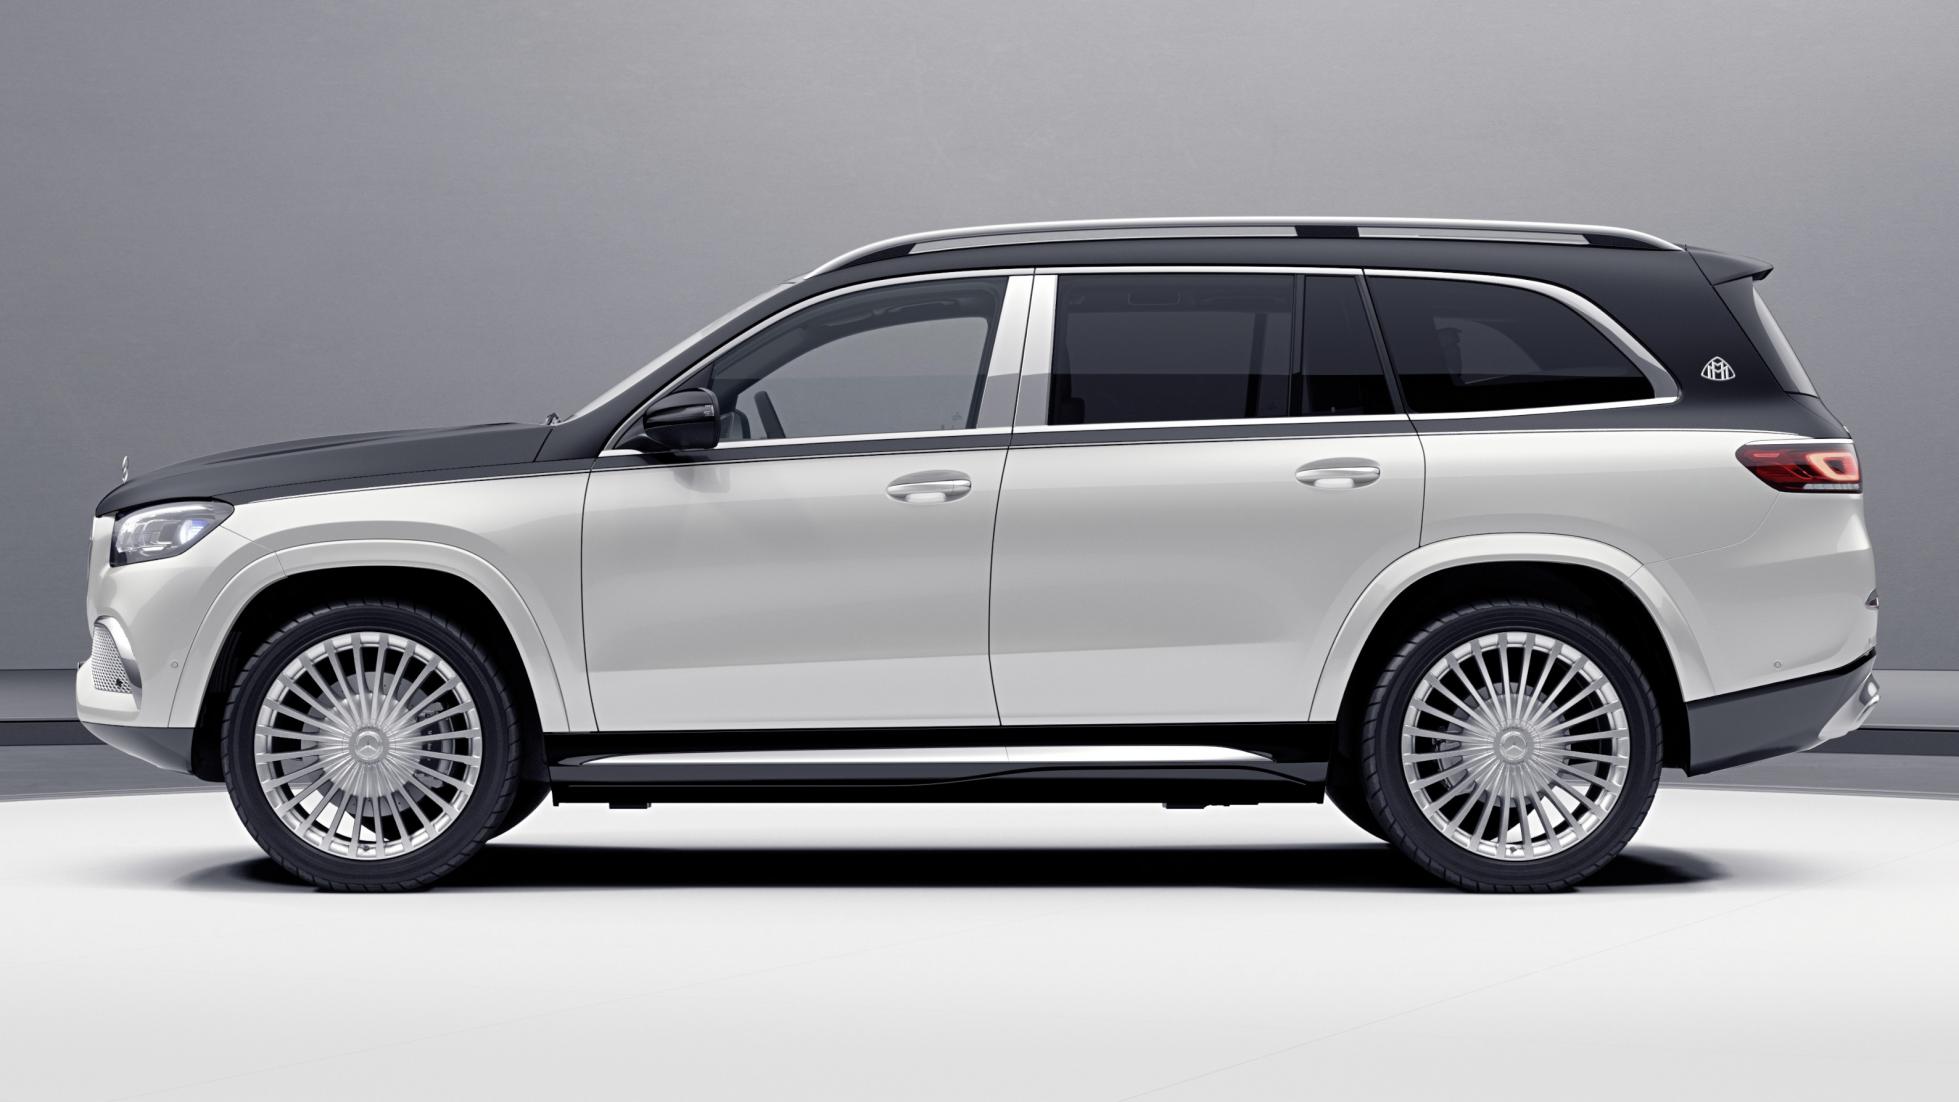 Mercedes-Maybach's Luxurious GLS - Officially Mercedes Most Expensive SUV